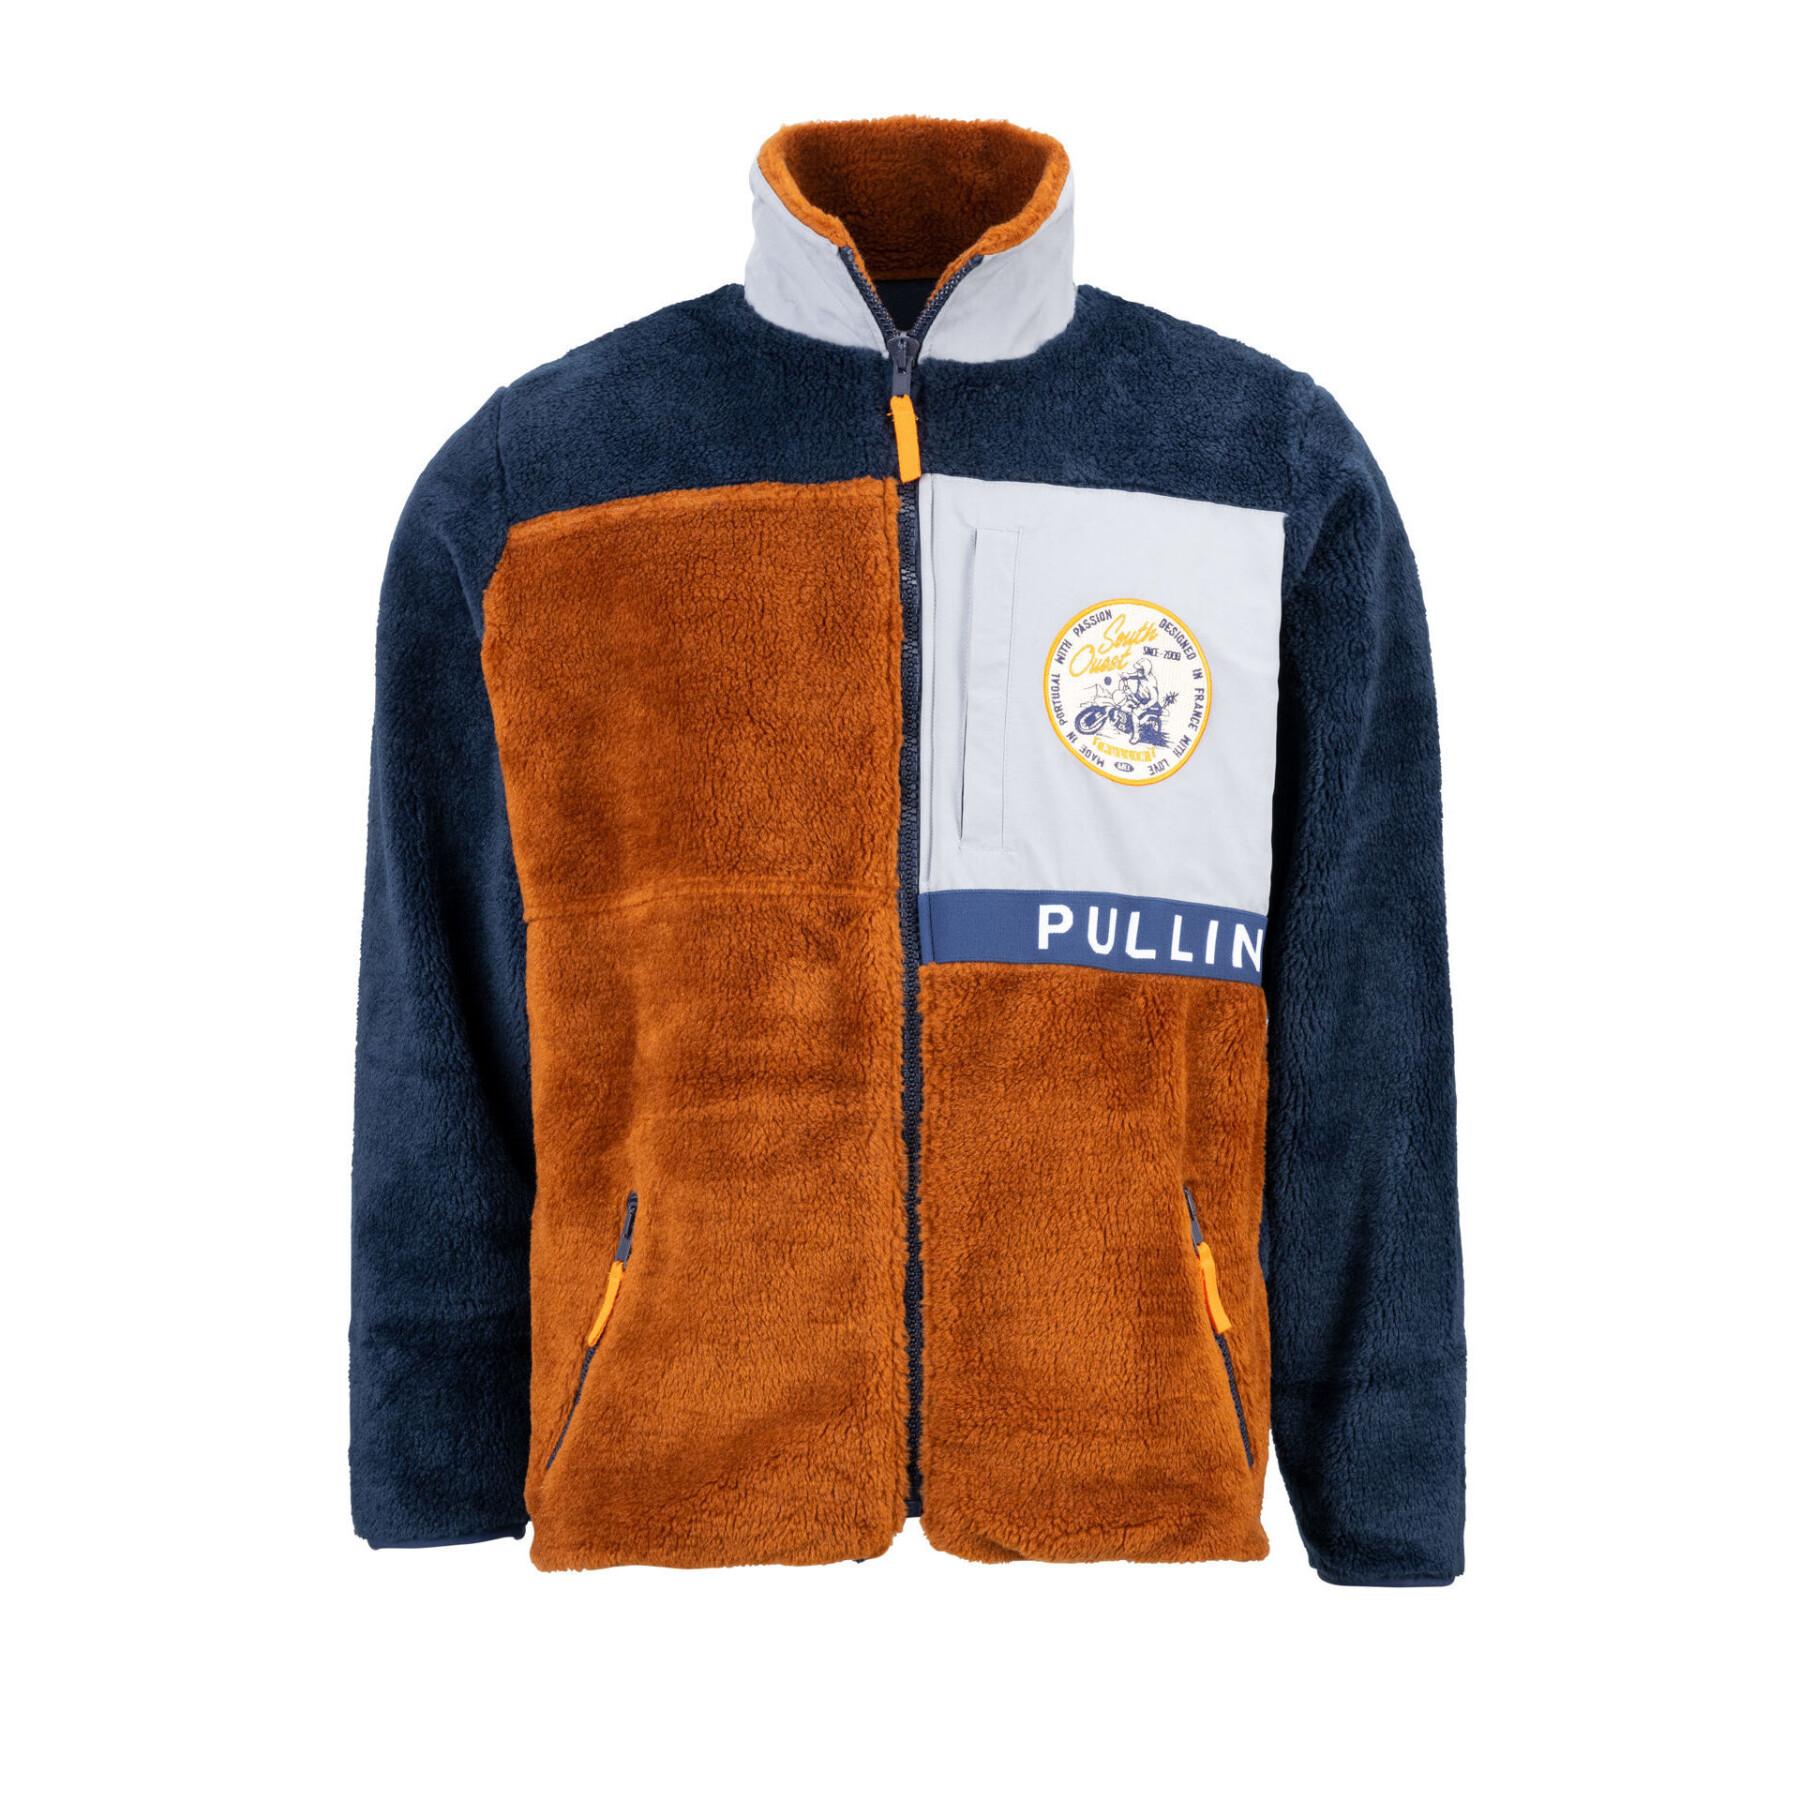 Pile Sherpa Pull-in